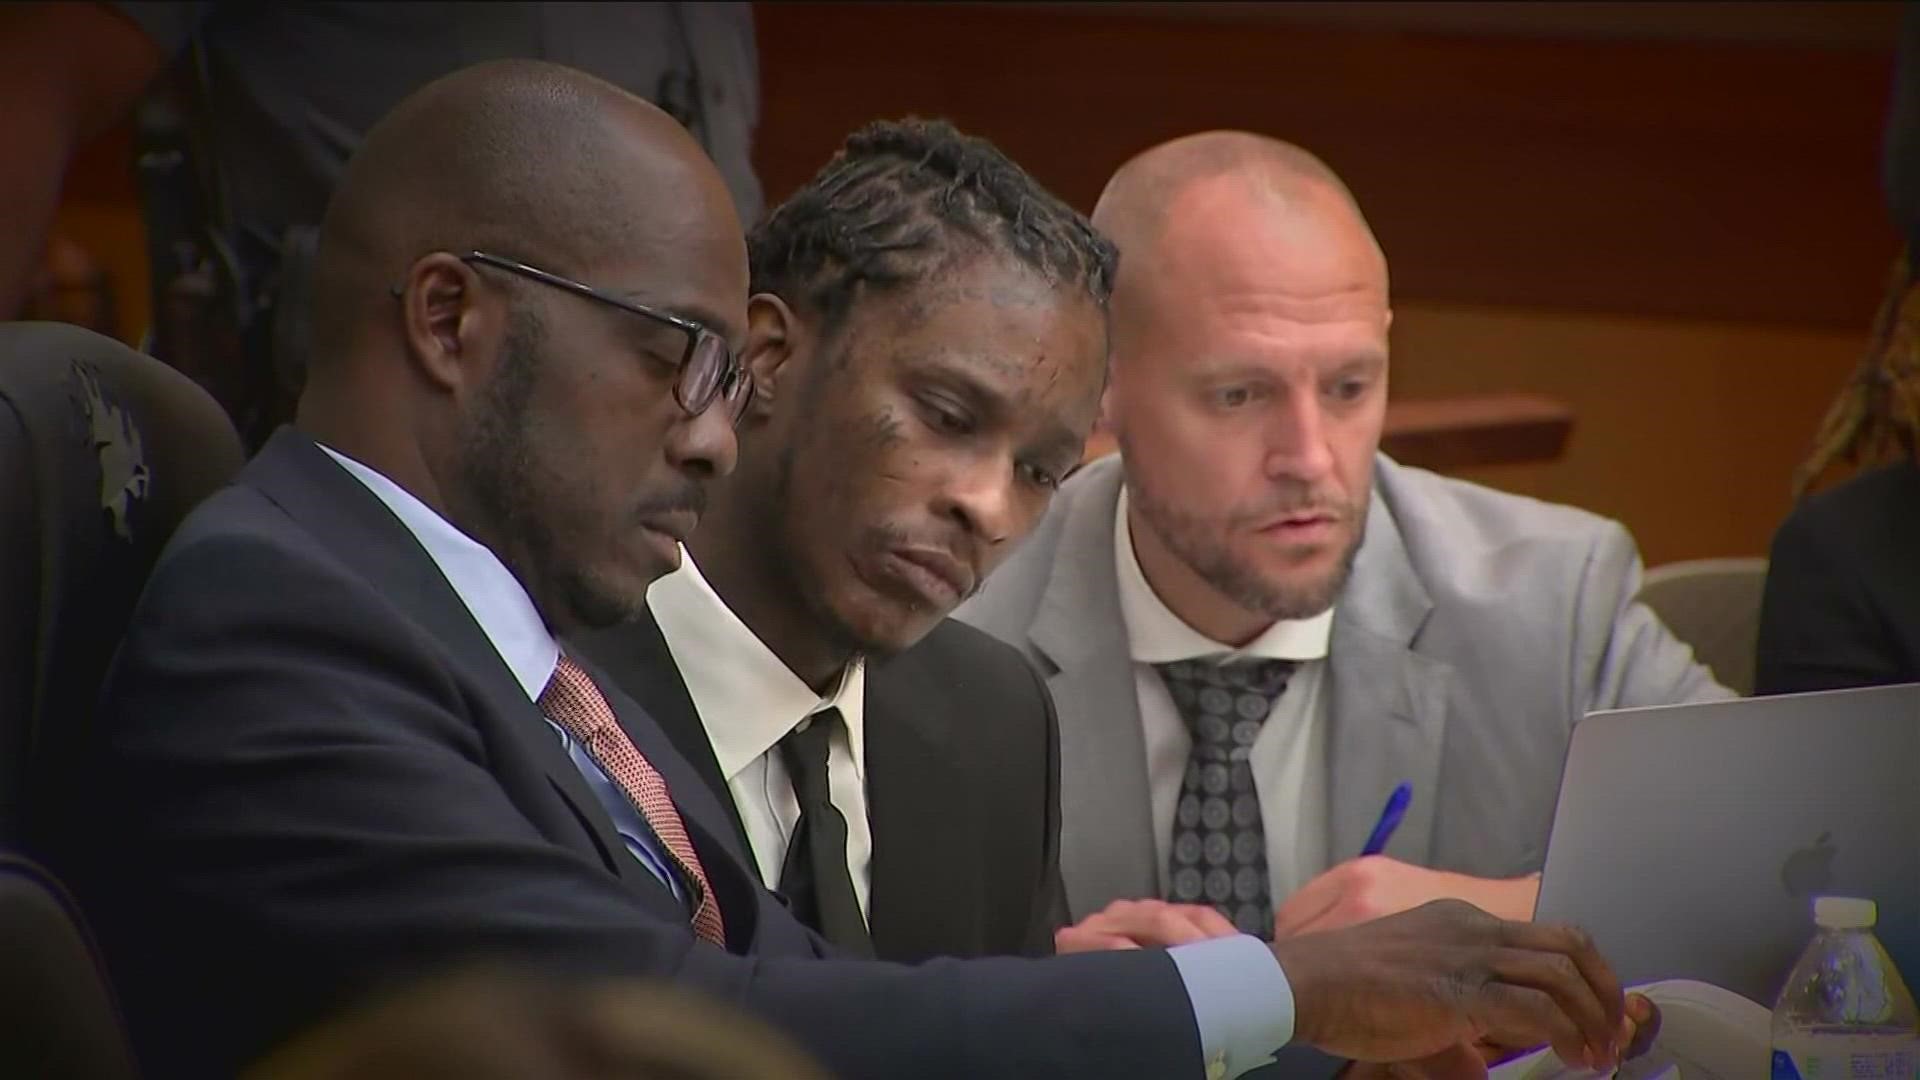 There are new details from the Fulton County courthouse in the RICO case against Atlanta rapper Young Thug.